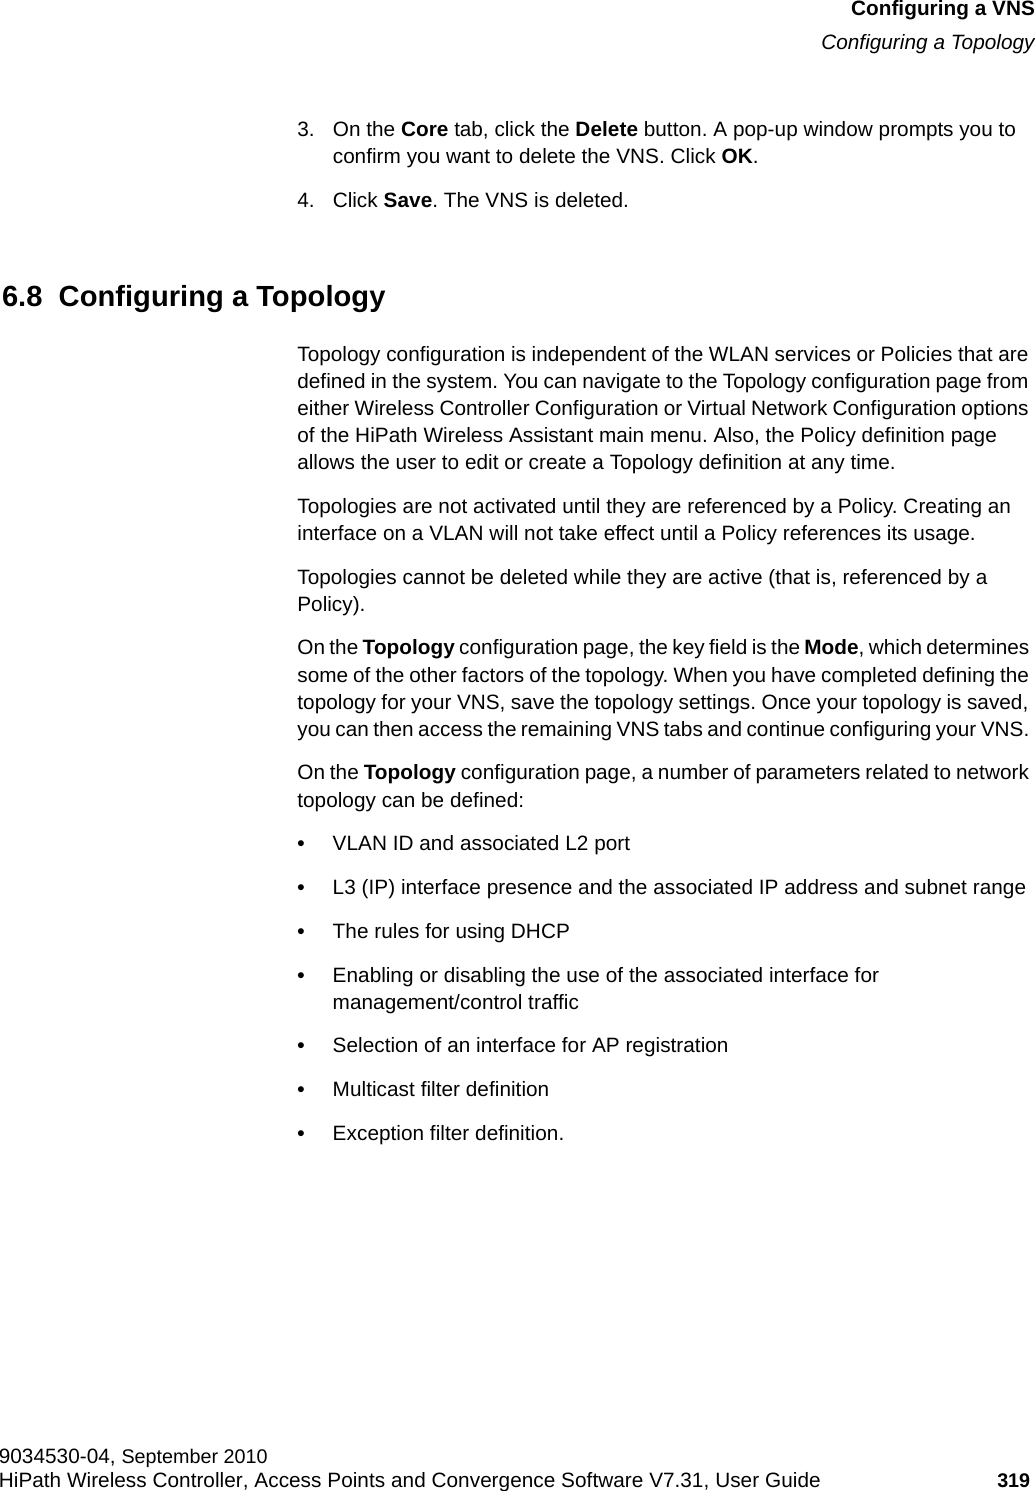 hwc_vnsconfiguration.fmConfiguring a VNSConfiguring a Topology9034530-04, September 2010HiPath Wireless Controller, Access Points and Convergence Software V7.31, User Guide 319         3. On the Core tab, click the Delete button. A pop-up window prompts you to confirm you want to delete the VNS. Click OK.4. Click Save. The VNS is deleted.6.8  Configuring a TopologyTopology configuration is independent of the WLAN services or Policies that are defined in the system. You can navigate to the Topology configuration page from either Wireless Controller Configuration or Virtual Network Configuration options of the HiPath Wireless Assistant main menu. Also, the Policy definition page allows the user to edit or create a Topology definition at any time.Topologies are not activated until they are referenced by a Policy. Creating an interface on a VLAN will not take effect until a Policy references its usage.Topologies cannot be deleted while they are active (that is, referenced by a Policy).On the Topology configuration page, the key field is the Mode, which determines some of the other factors of the topology. When you have completed defining the topology for your VNS, save the topology settings. Once your topology is saved, you can then access the remaining VNS tabs and continue configuring your VNS. On the Topology configuration page, a number of parameters related to network topology can be defined:•VLAN ID and associated L2 port•L3 (IP) interface presence and the associated IP address and subnet range•The rules for using DHCP•Enabling or disabling the use of the associated interface for management/control traffic•Selection of an interface for AP registration•Multicast filter definition•Exception filter definition.